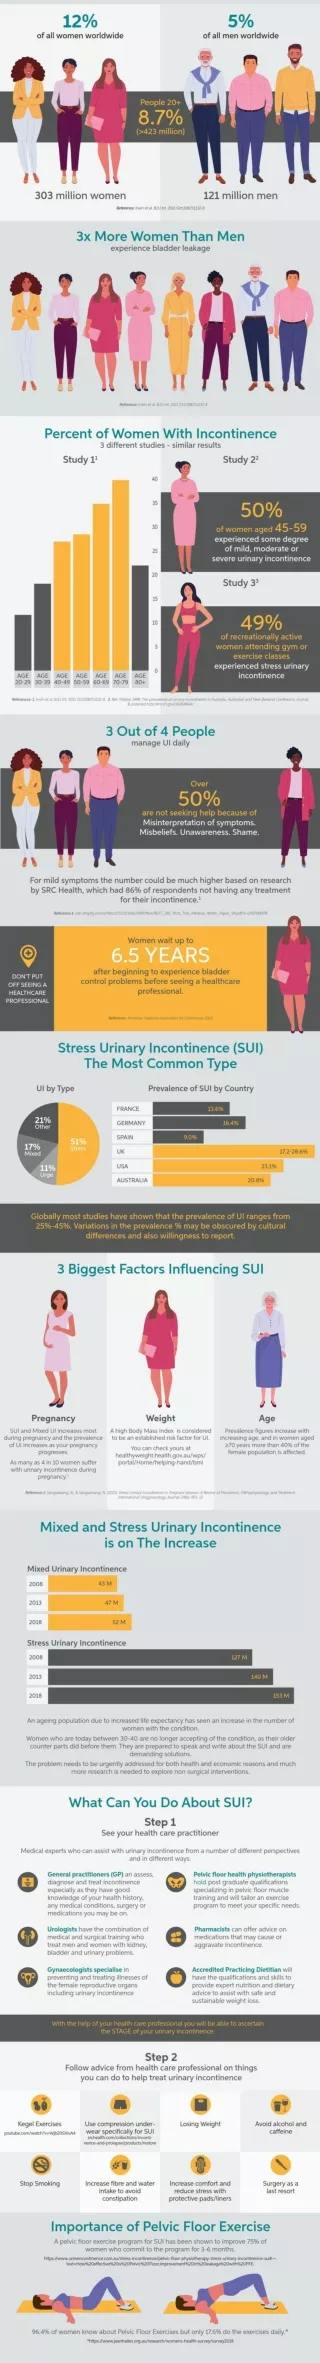 U&I Can Make a Difference to Stress Urinary Incontinence